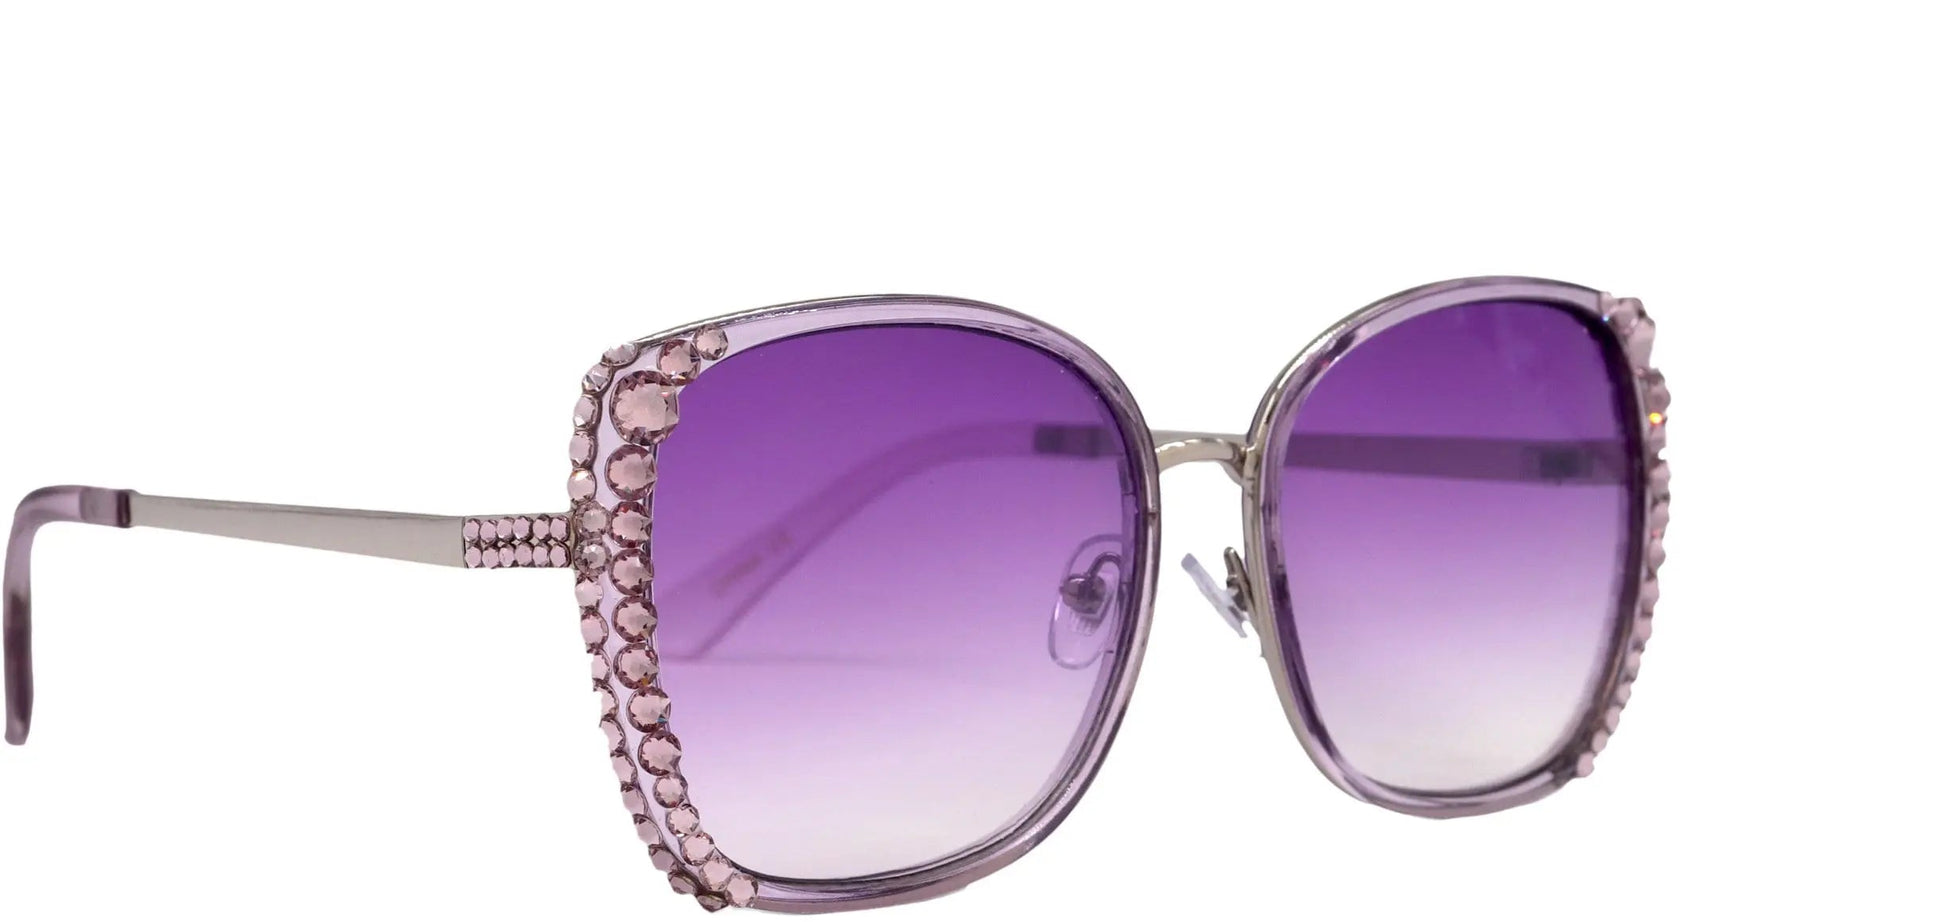 Bling Women Sunglasses Adorned W (Amethyst)Genuine European Crystals 100% UV Protection (Purple) Square Translucent, NY Fifth Avenue